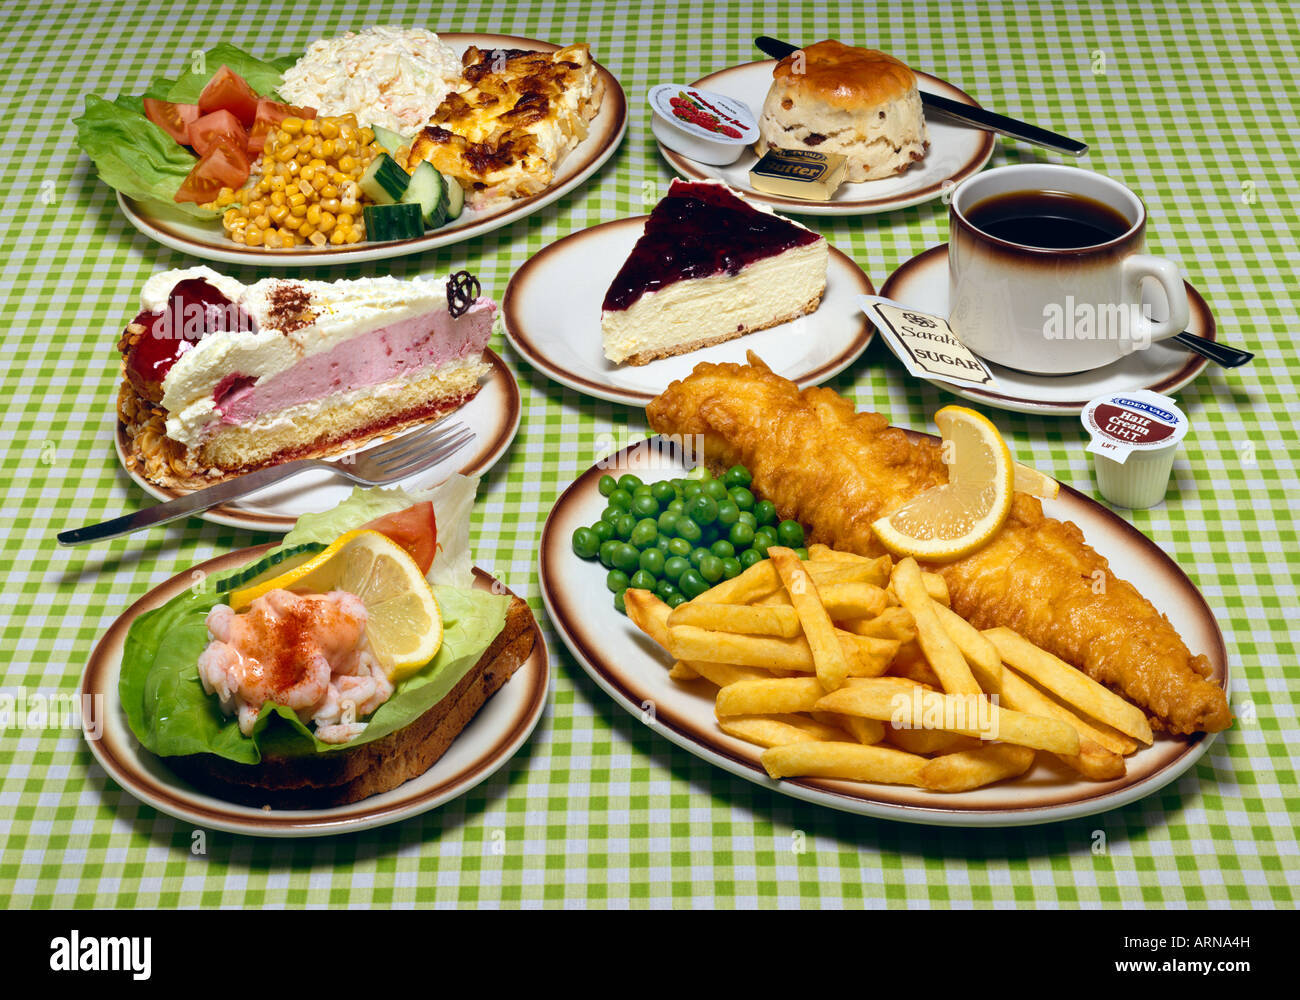 Selection Of Food  including fish & chips, salads, deserts coffee & a scone on a green gingham cloth on a Dinning table Stock Photo